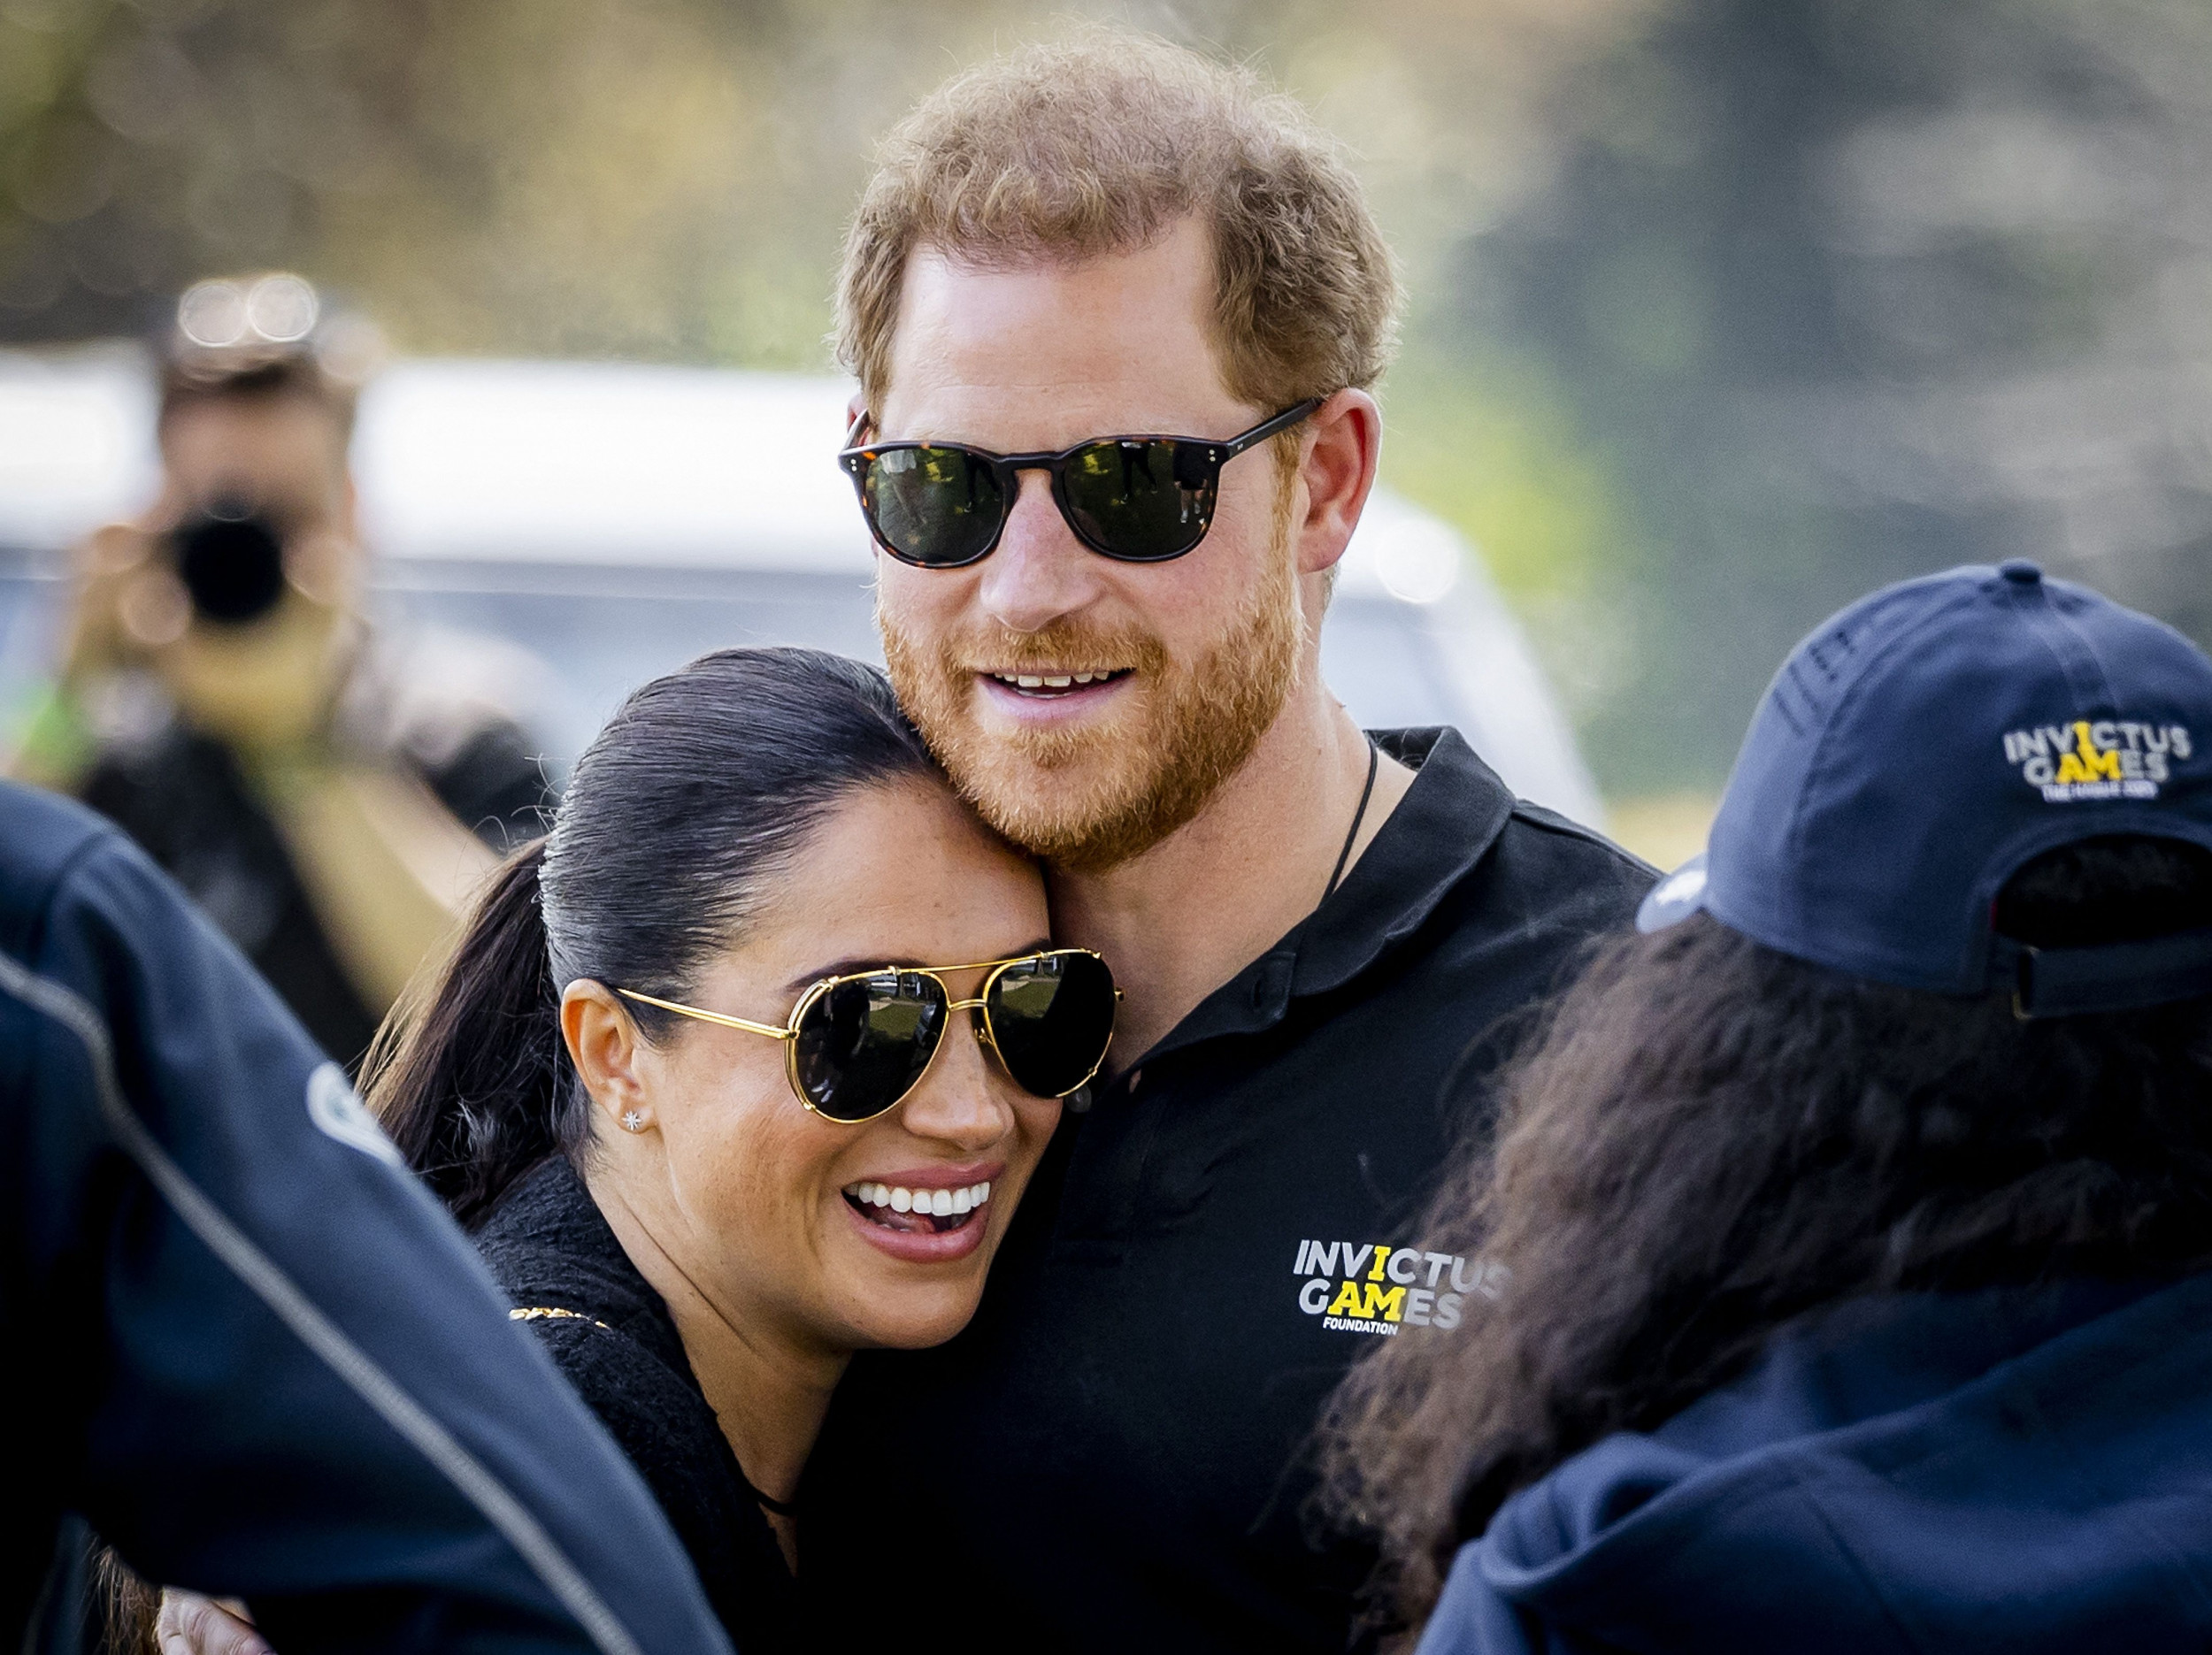 Prince Harry's Invictus Games Headed to Where Royals Escaped 'Megxit' Drama